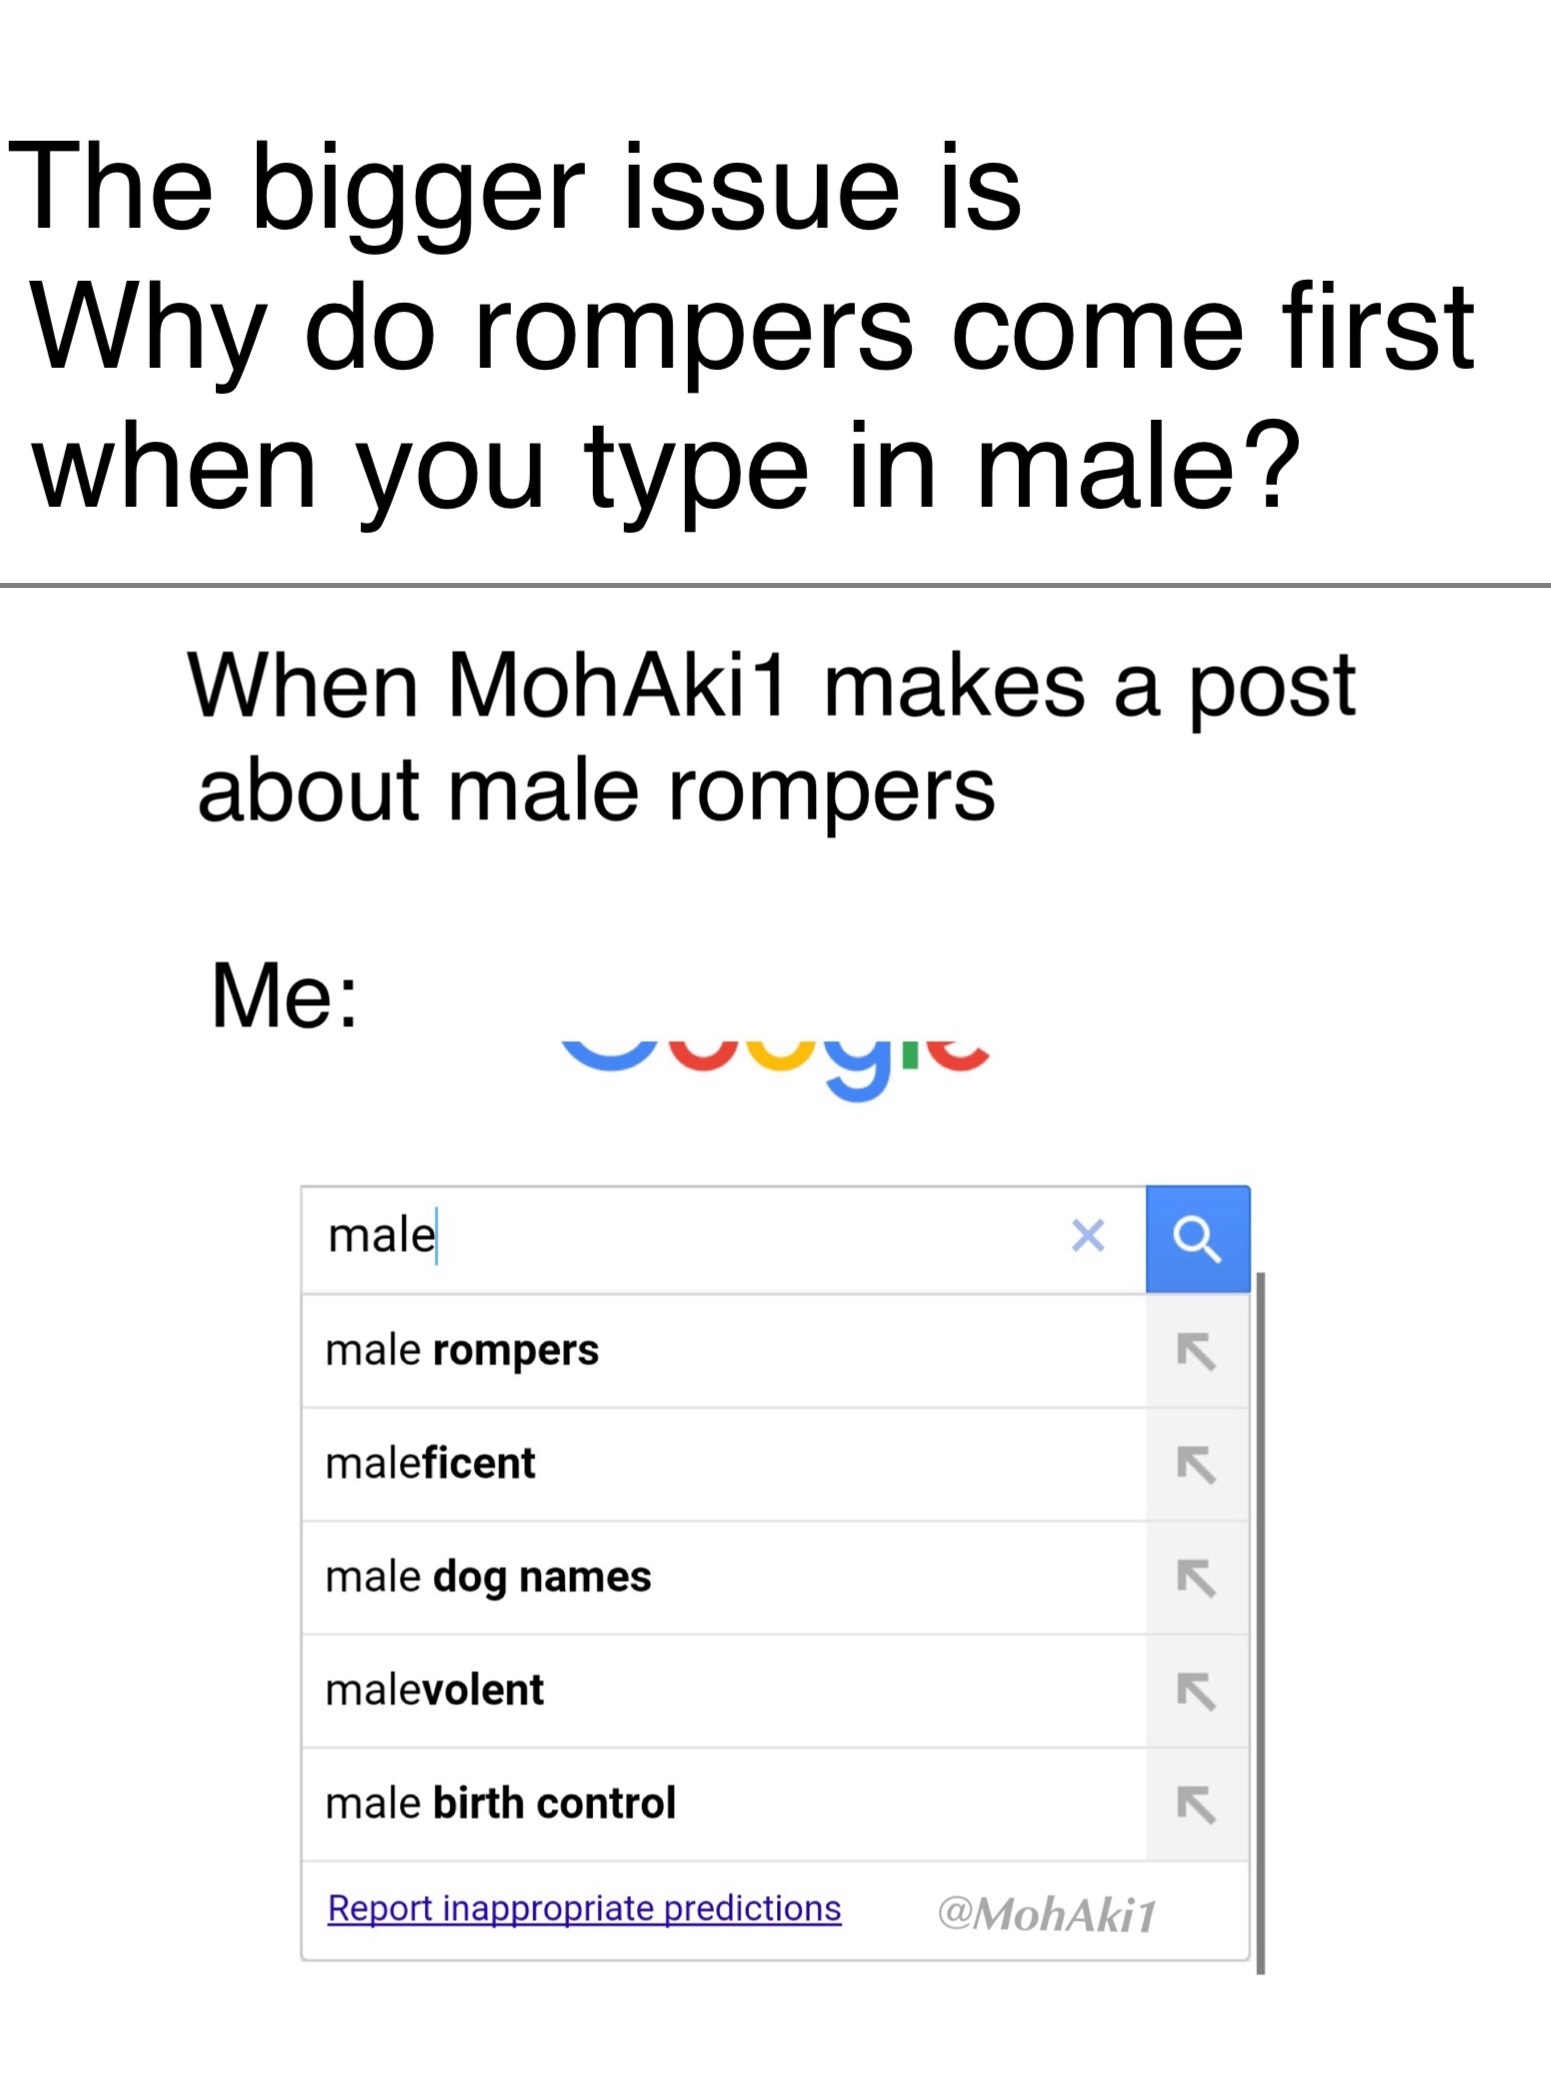 memes - angle - The bigger issue is Why do rompers come first when you type in male? When MohAki1 makes a post about male rompers Me voyi male male rompers maleficent male dog names kkkkk malevolent male birth control Report inappropriate predictions